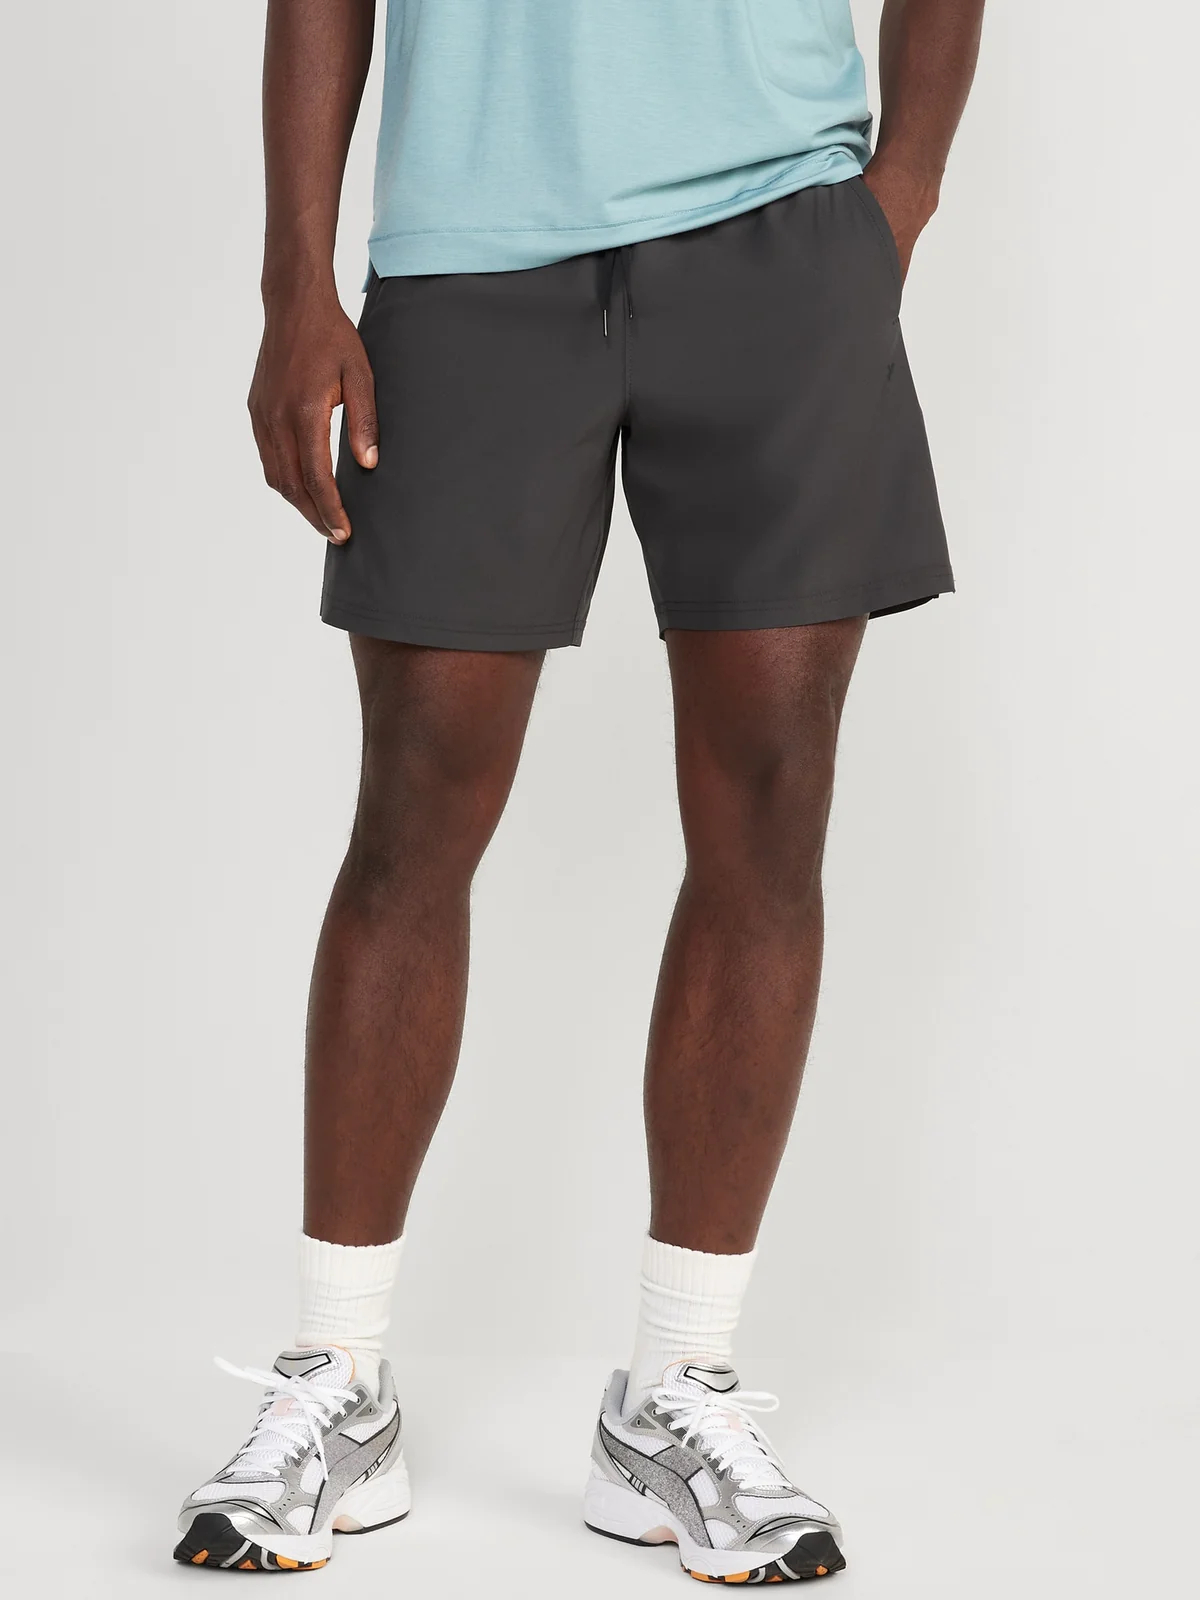 Men’s athletic shorts 7 inch inseam: Perfect for Performance